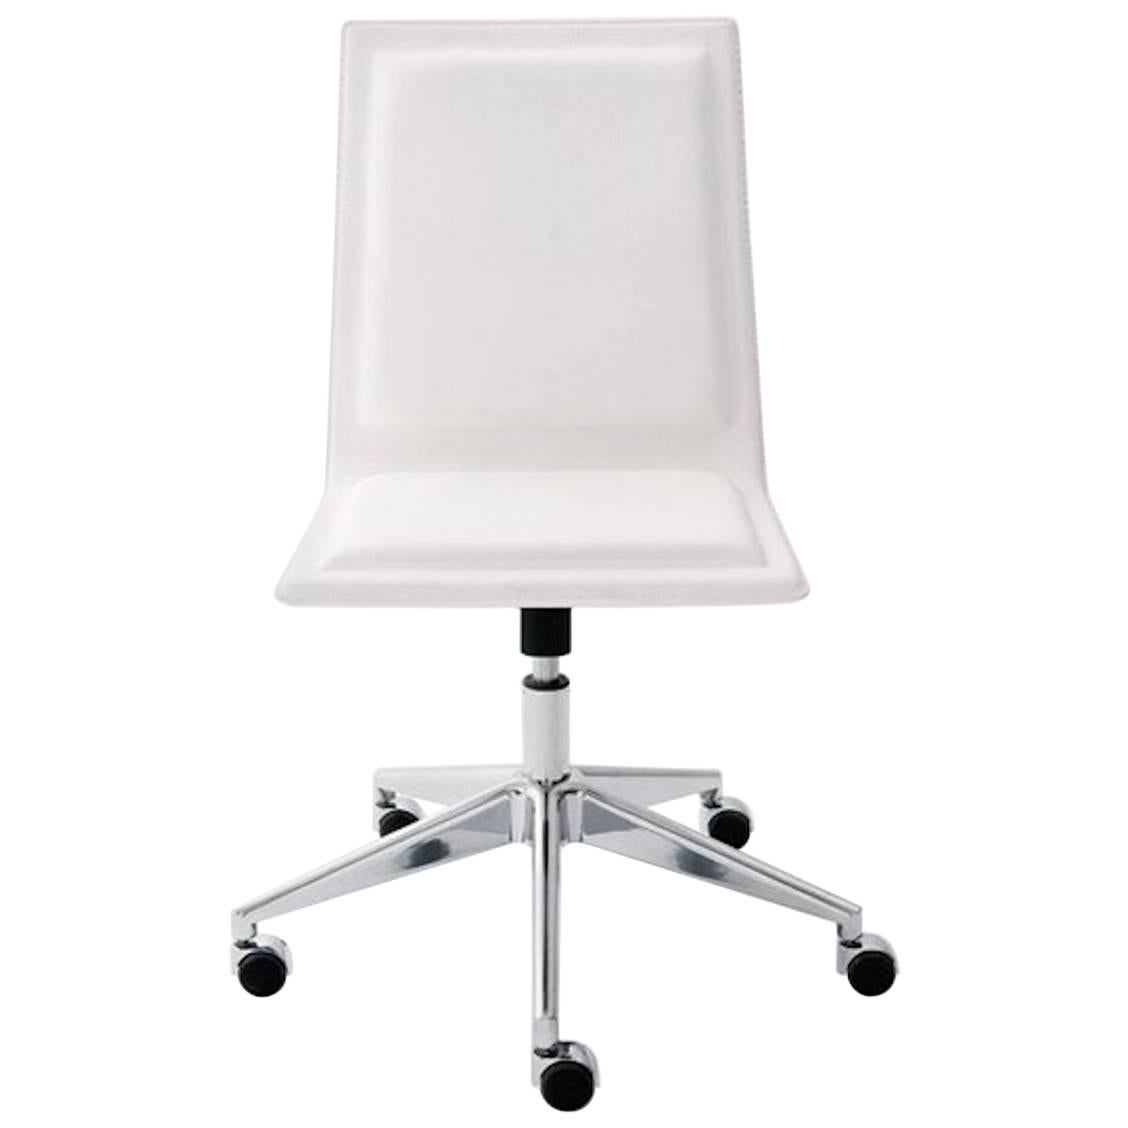 OFX 09 Ergonomic Office Chair with or Without Castors by Gallotti & Radice For Sale